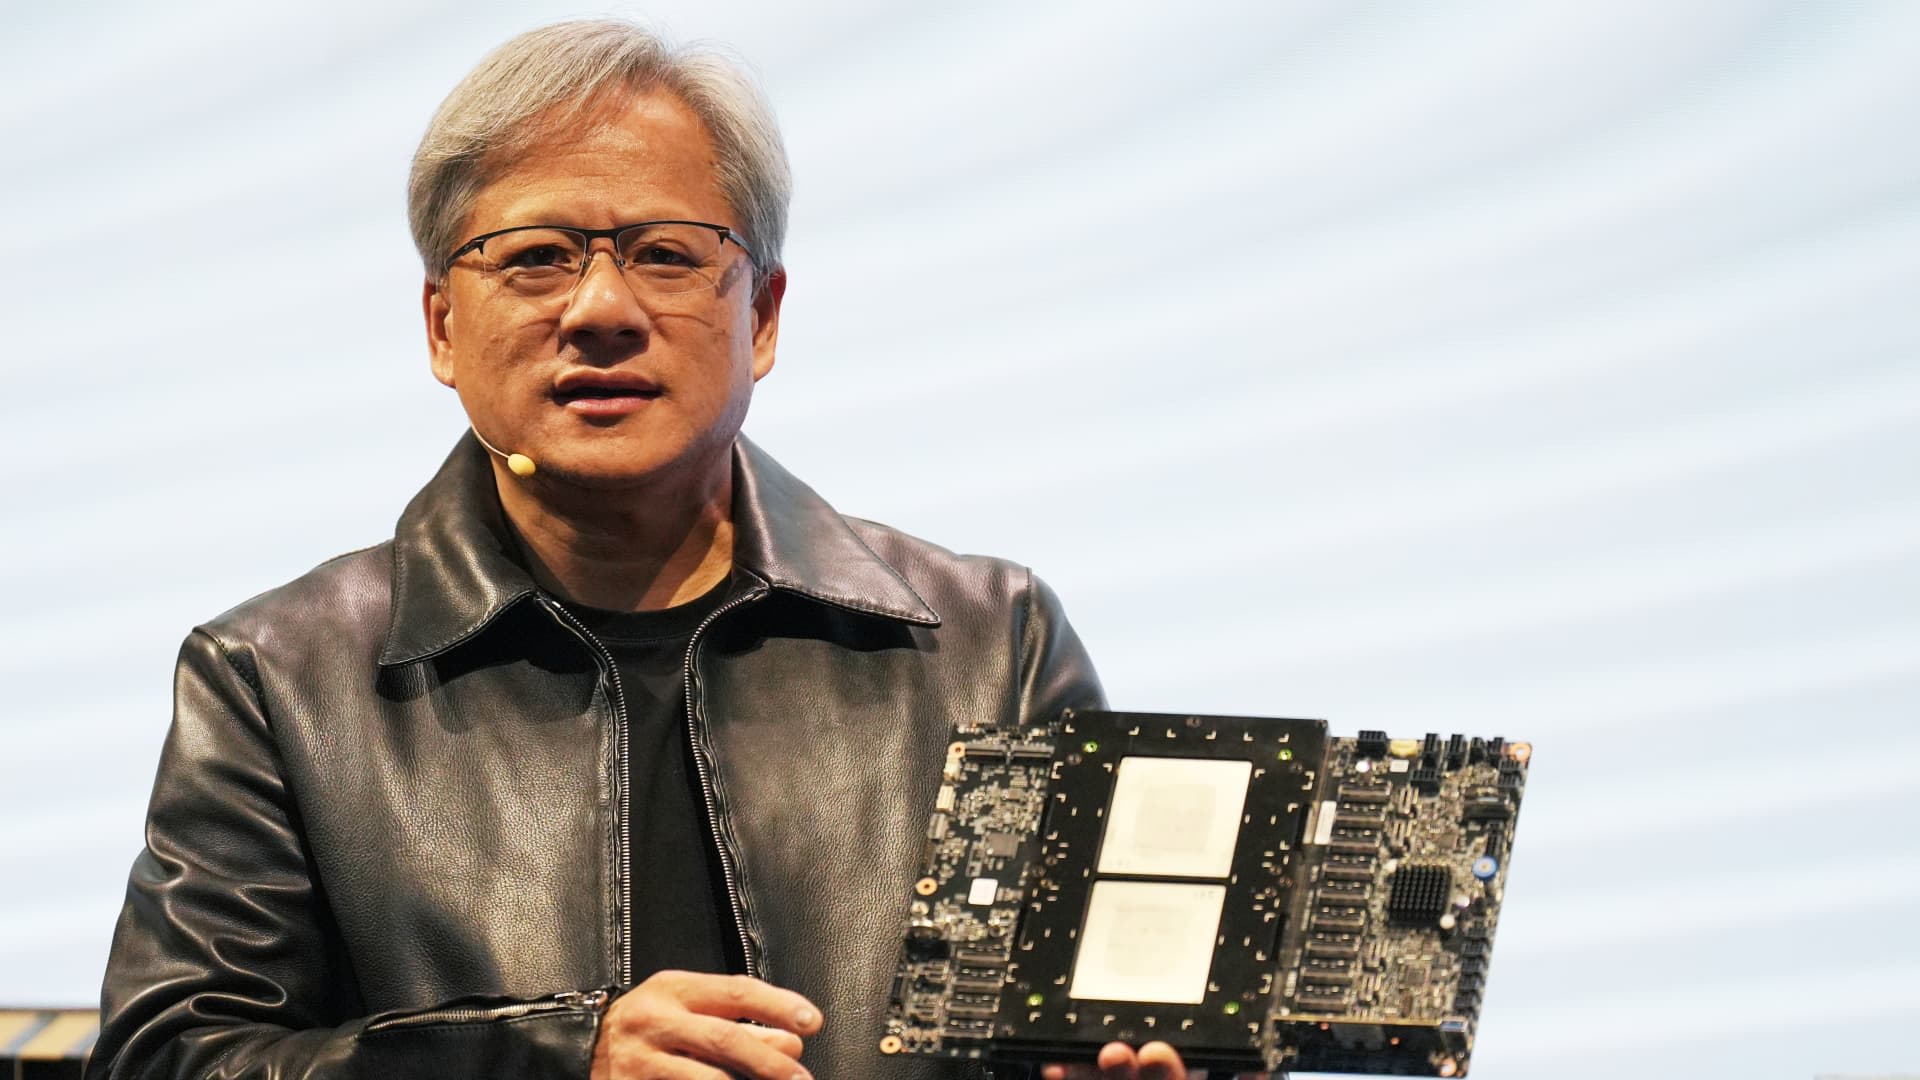 Jensen Huang started his $2 trillion company Nvidia at a Denny's breakfast booth